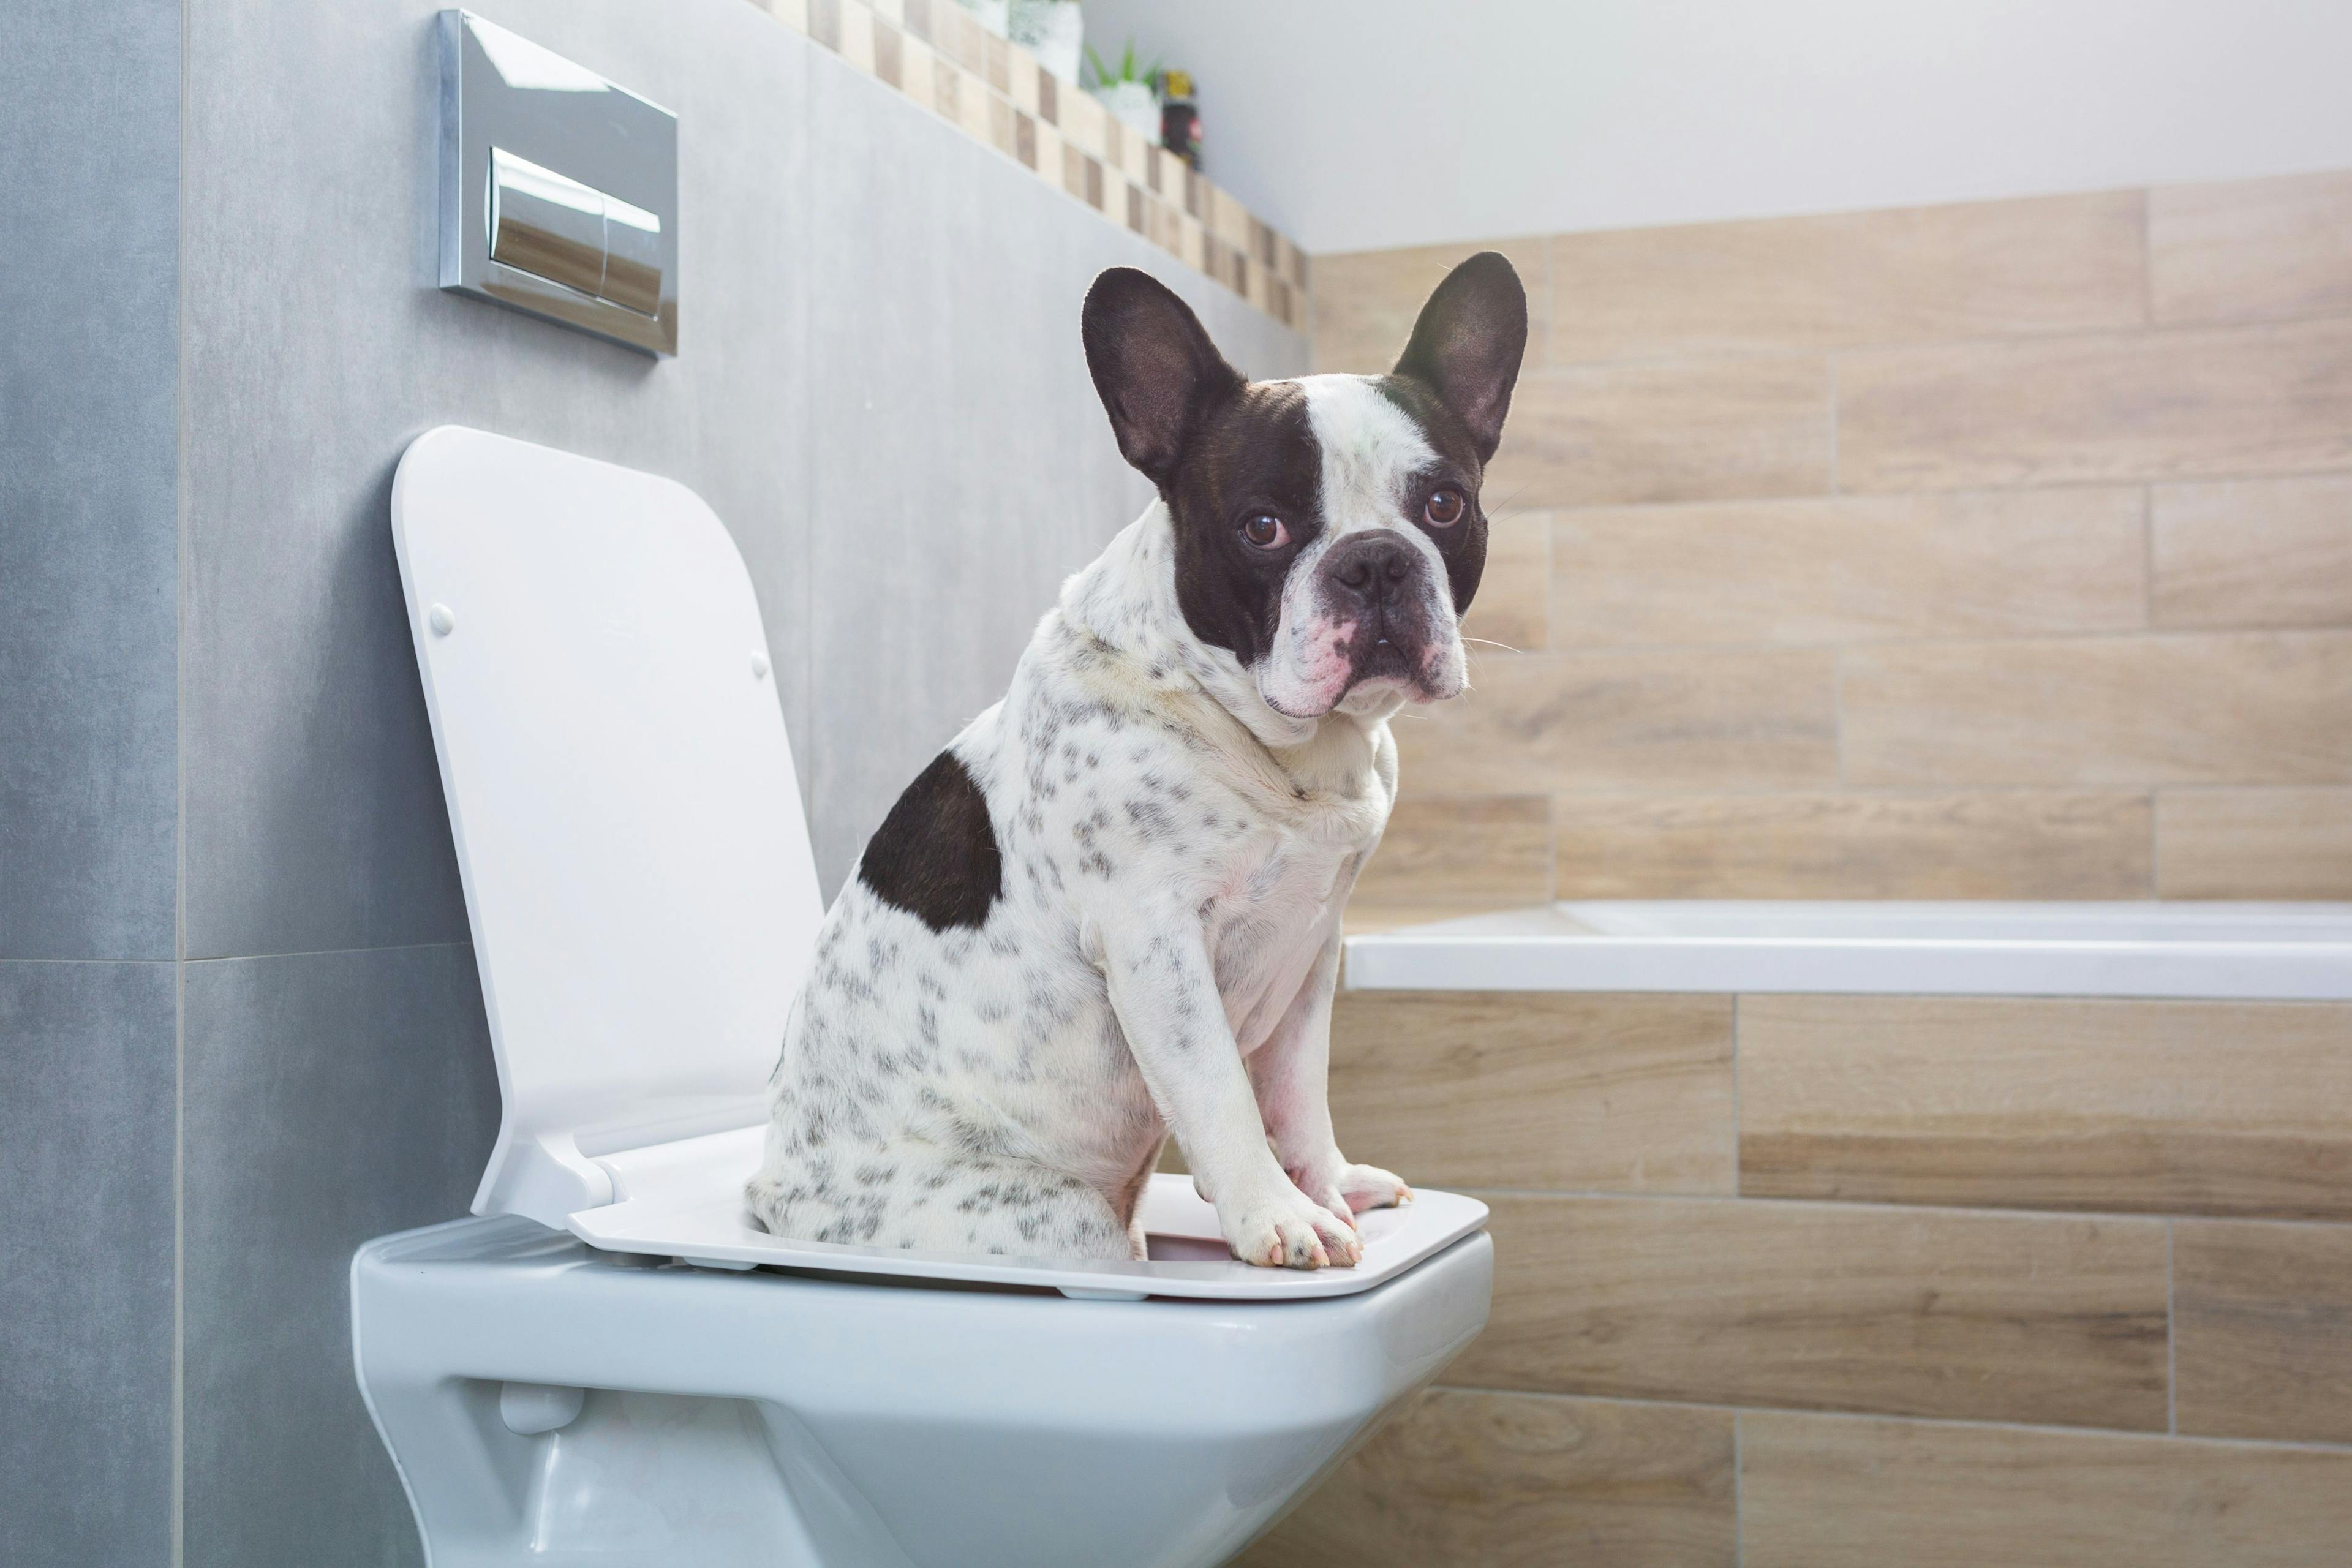 Urinalysis offers a noninasive, rapid screening for canine cancer detection